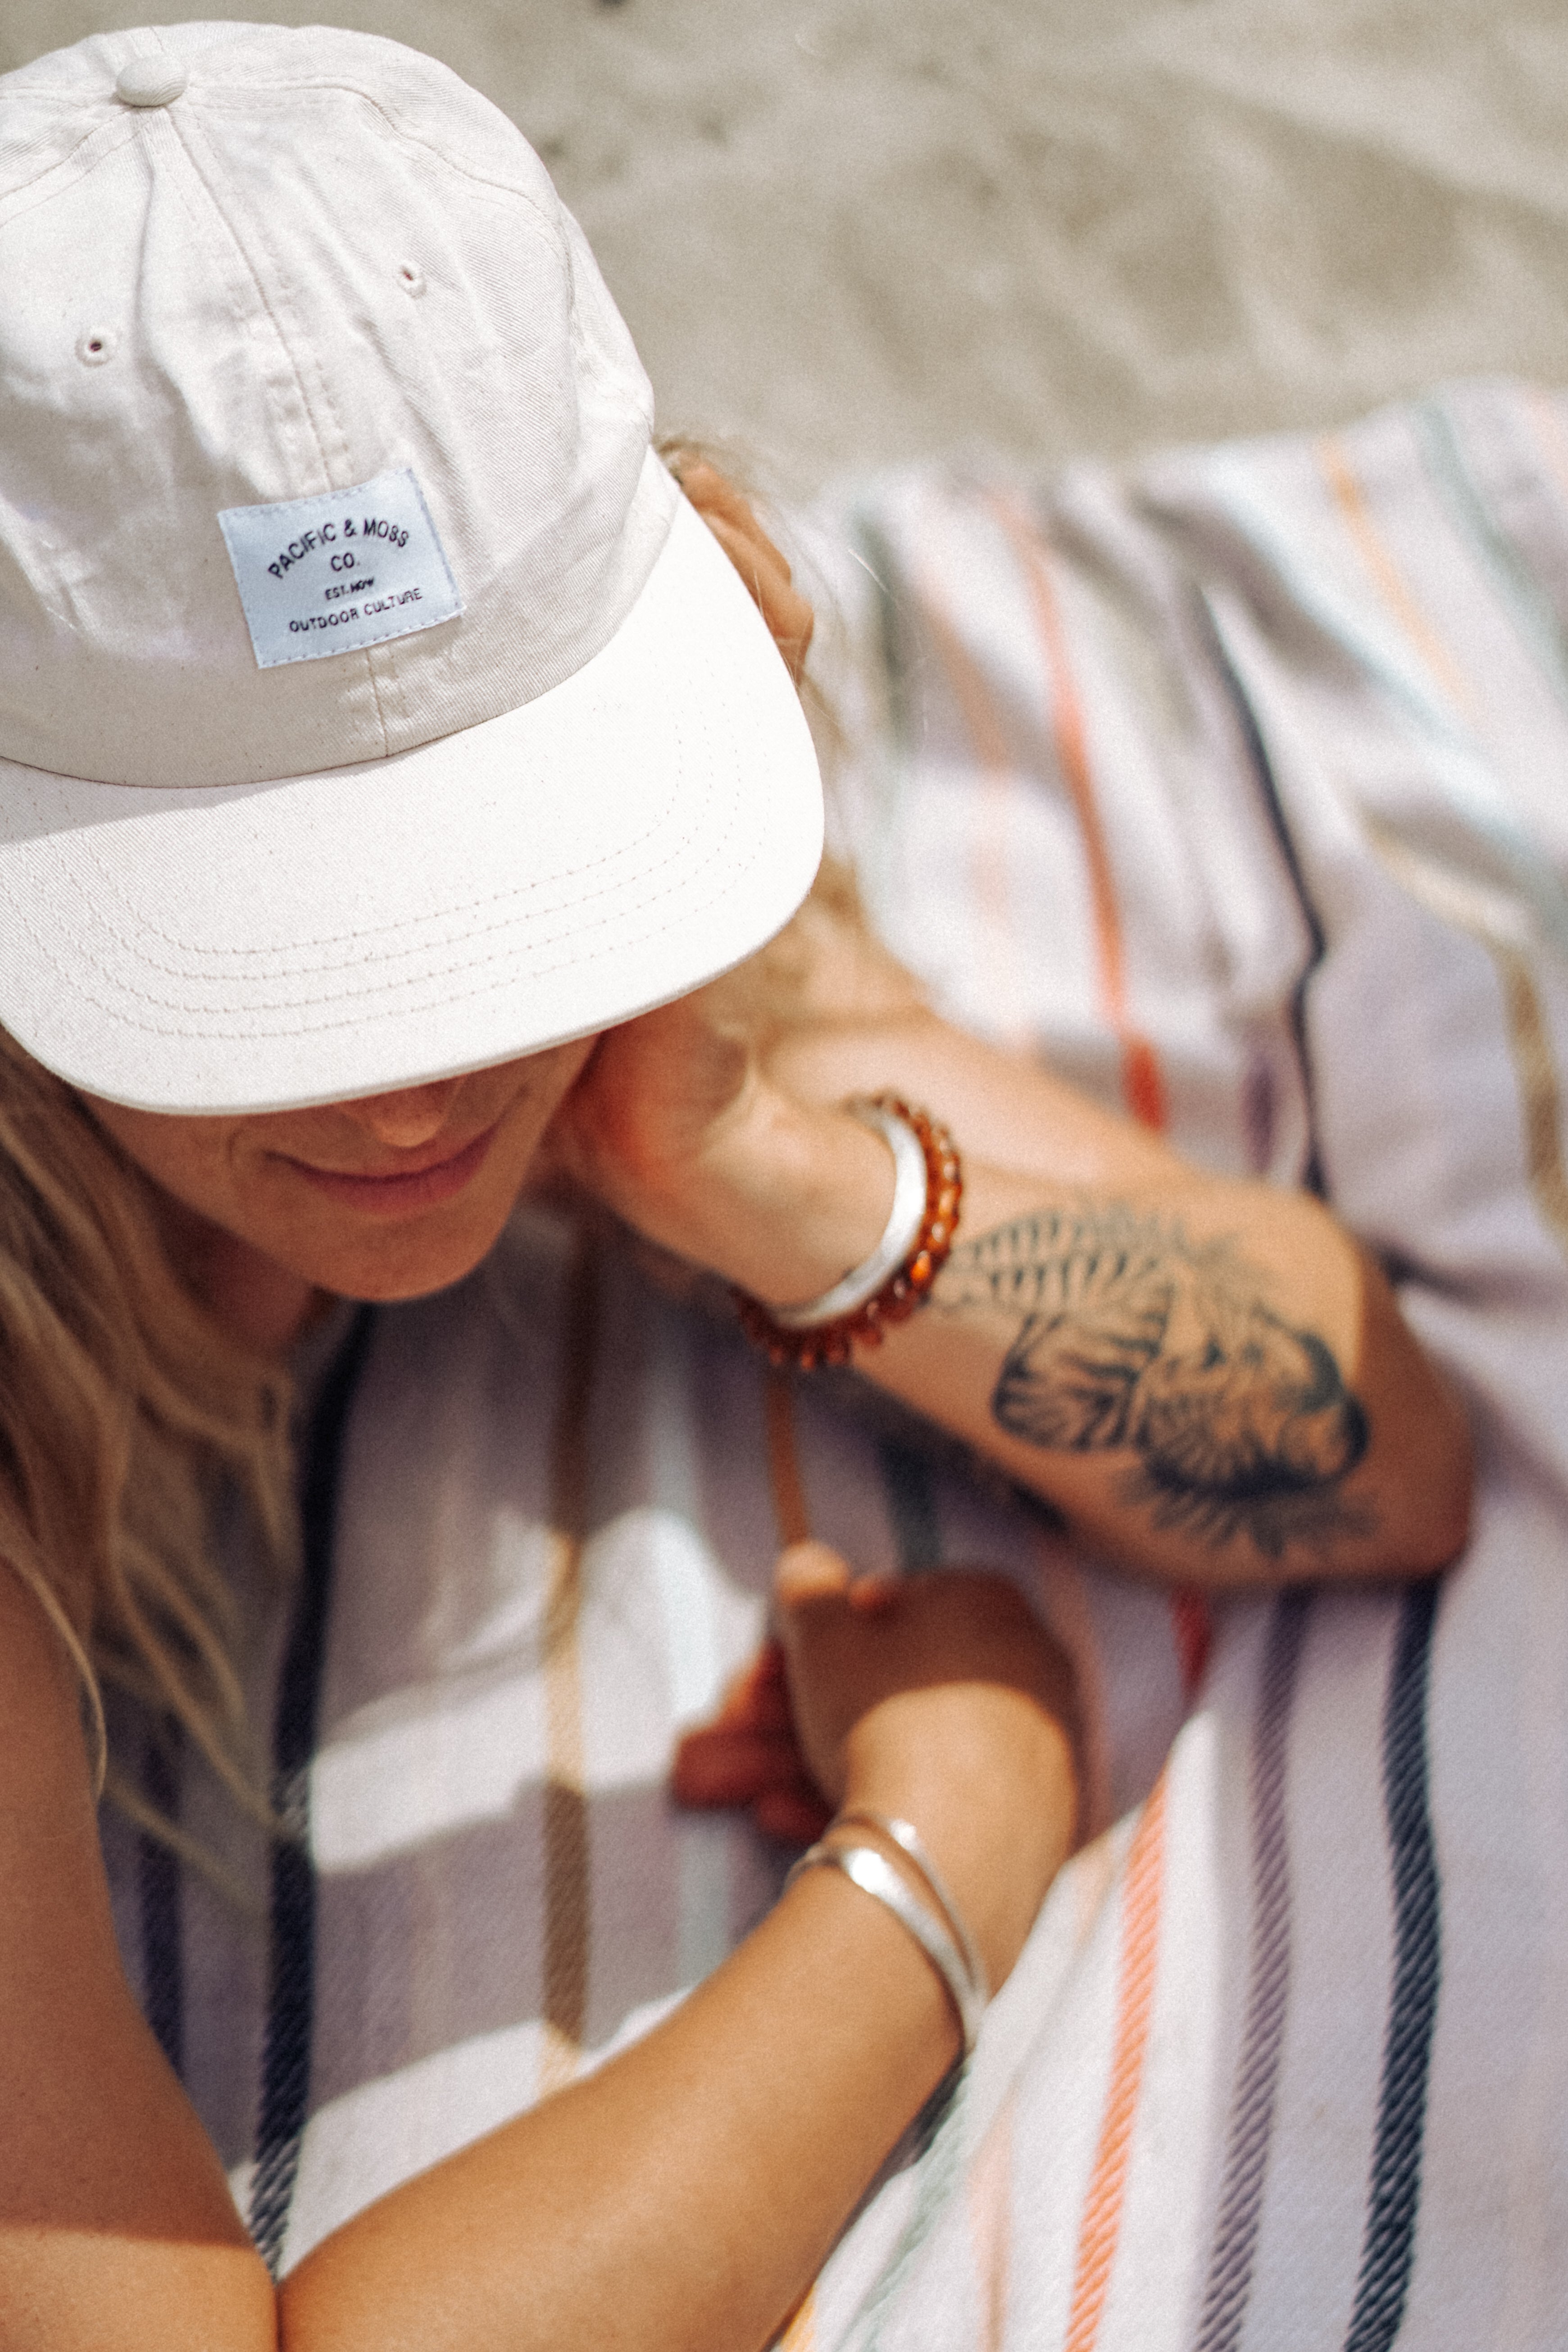 6 PANEL HAT COLLECTION – Pacific & Moss Co.